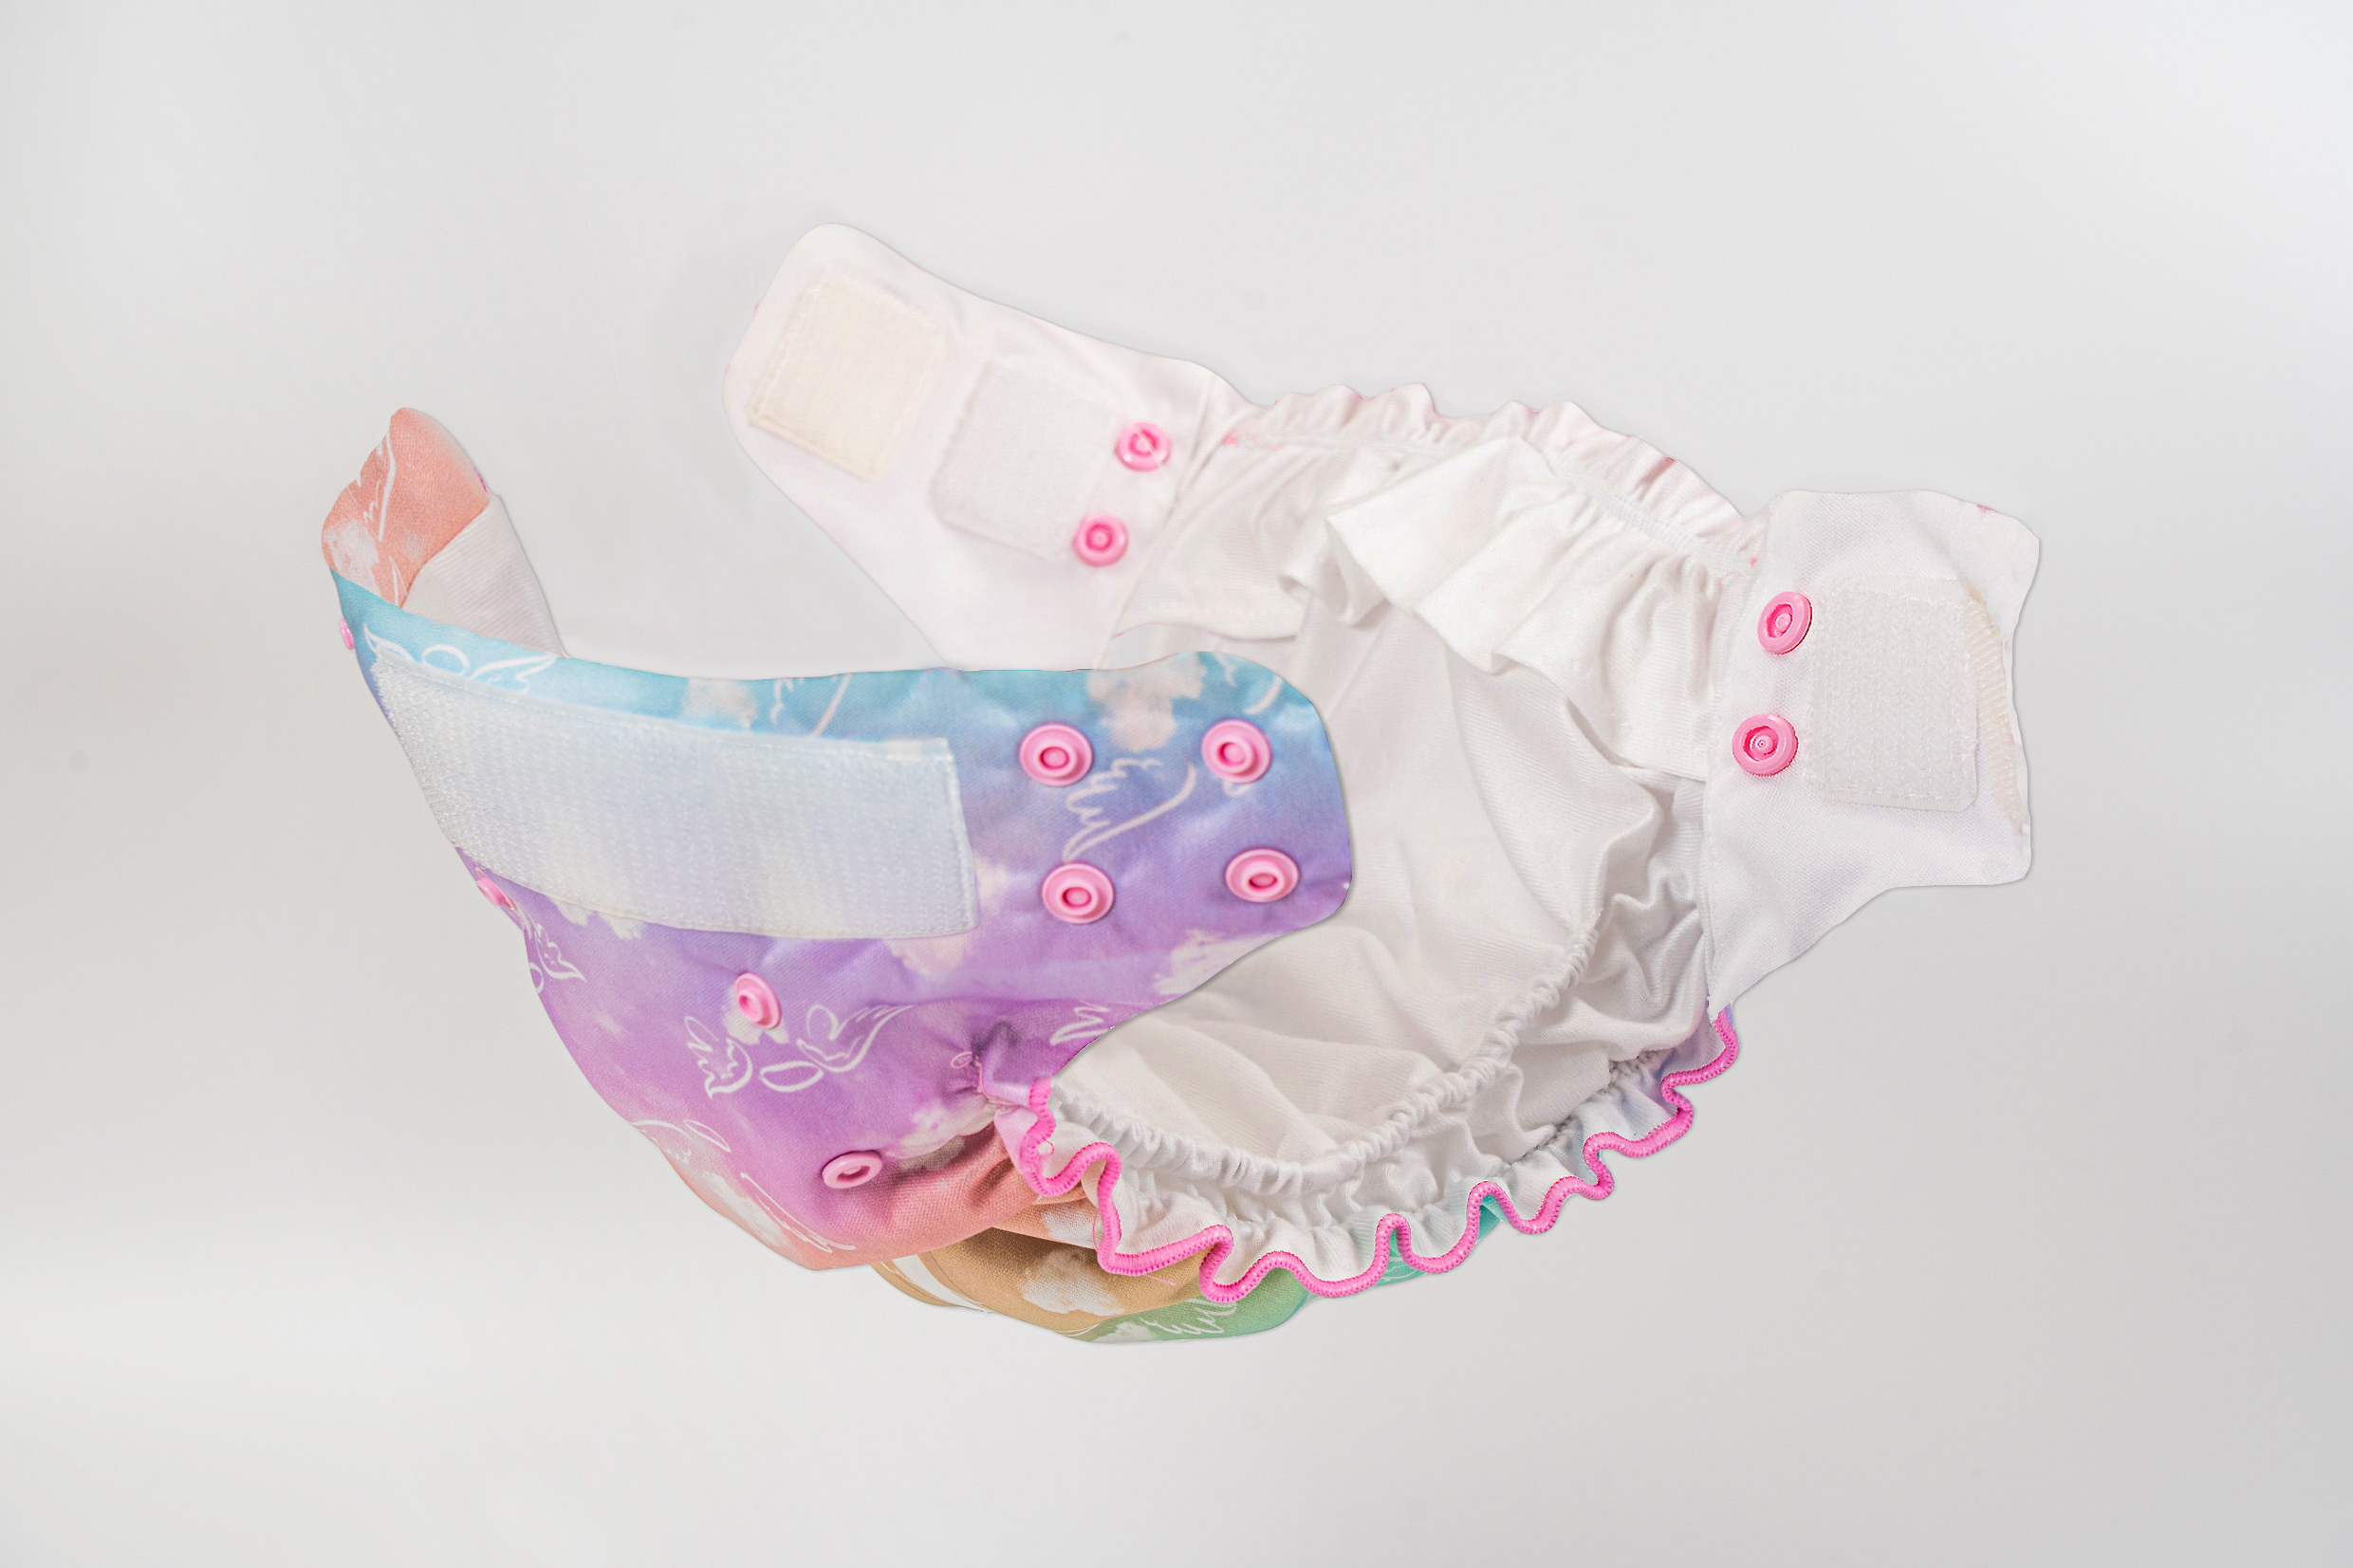 Fairywell Cloth diapers